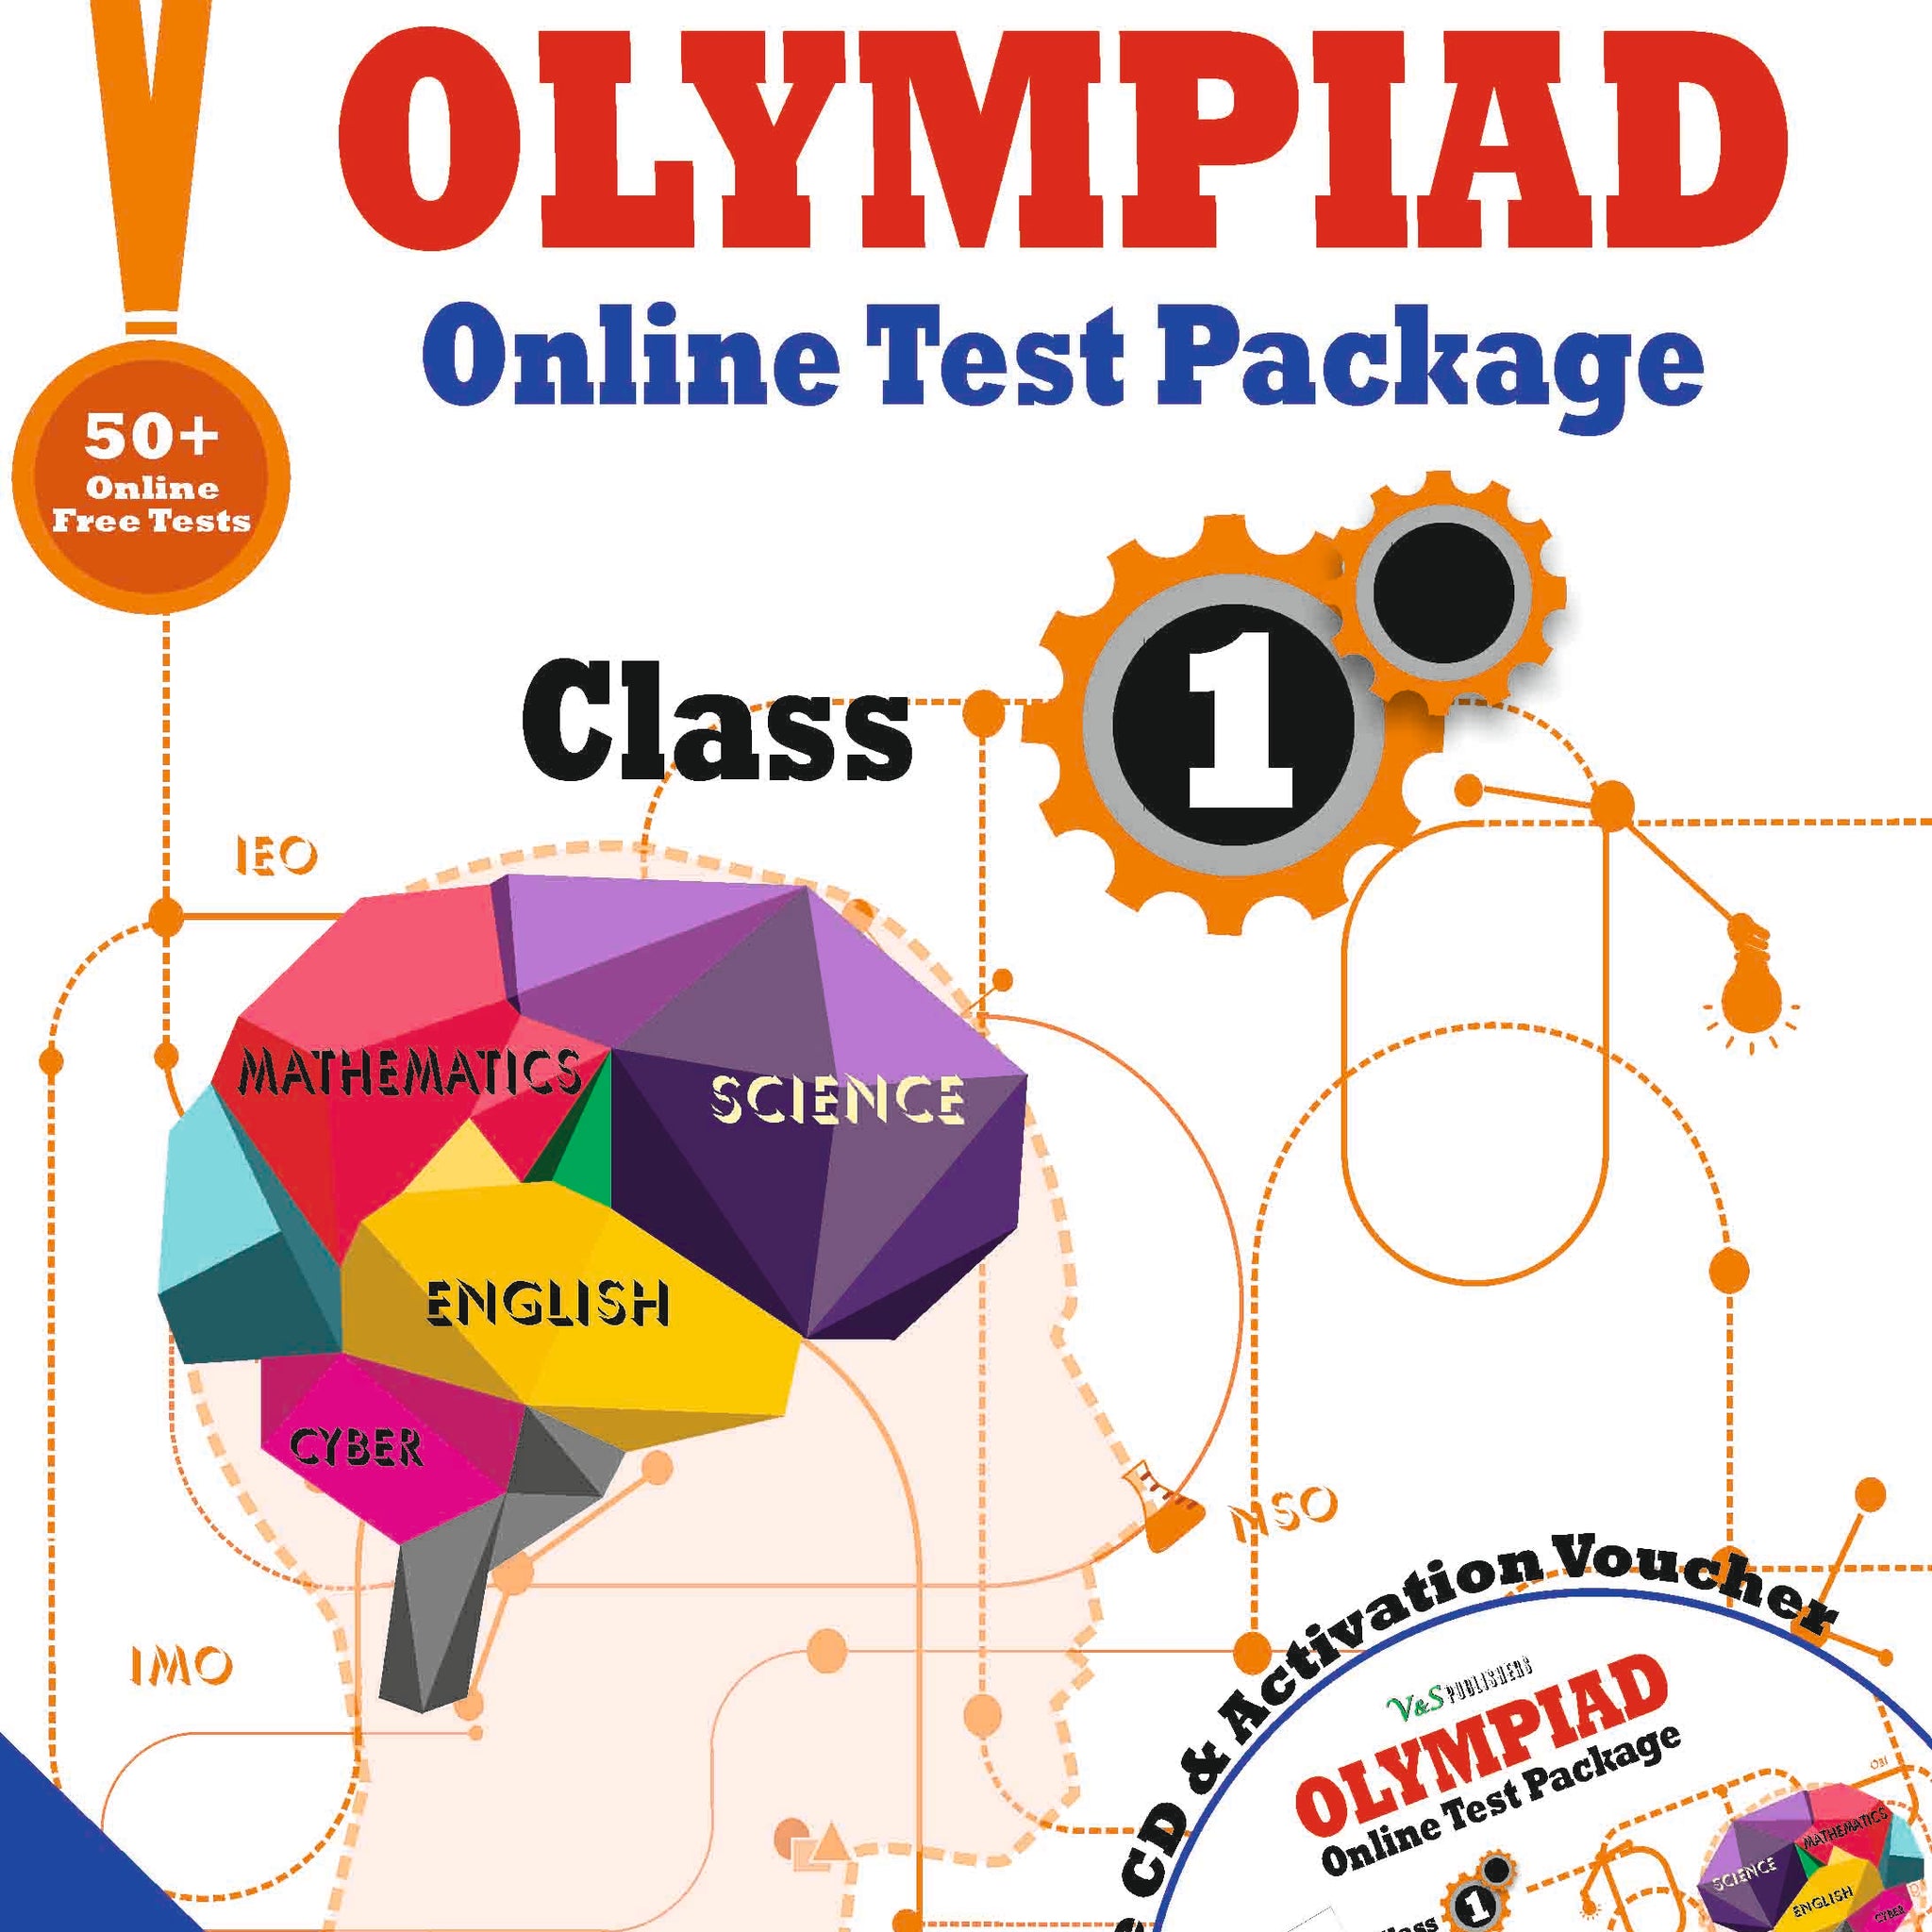 Olympiad Online Test Package Class 1 (Free CD With Activation Voucher)